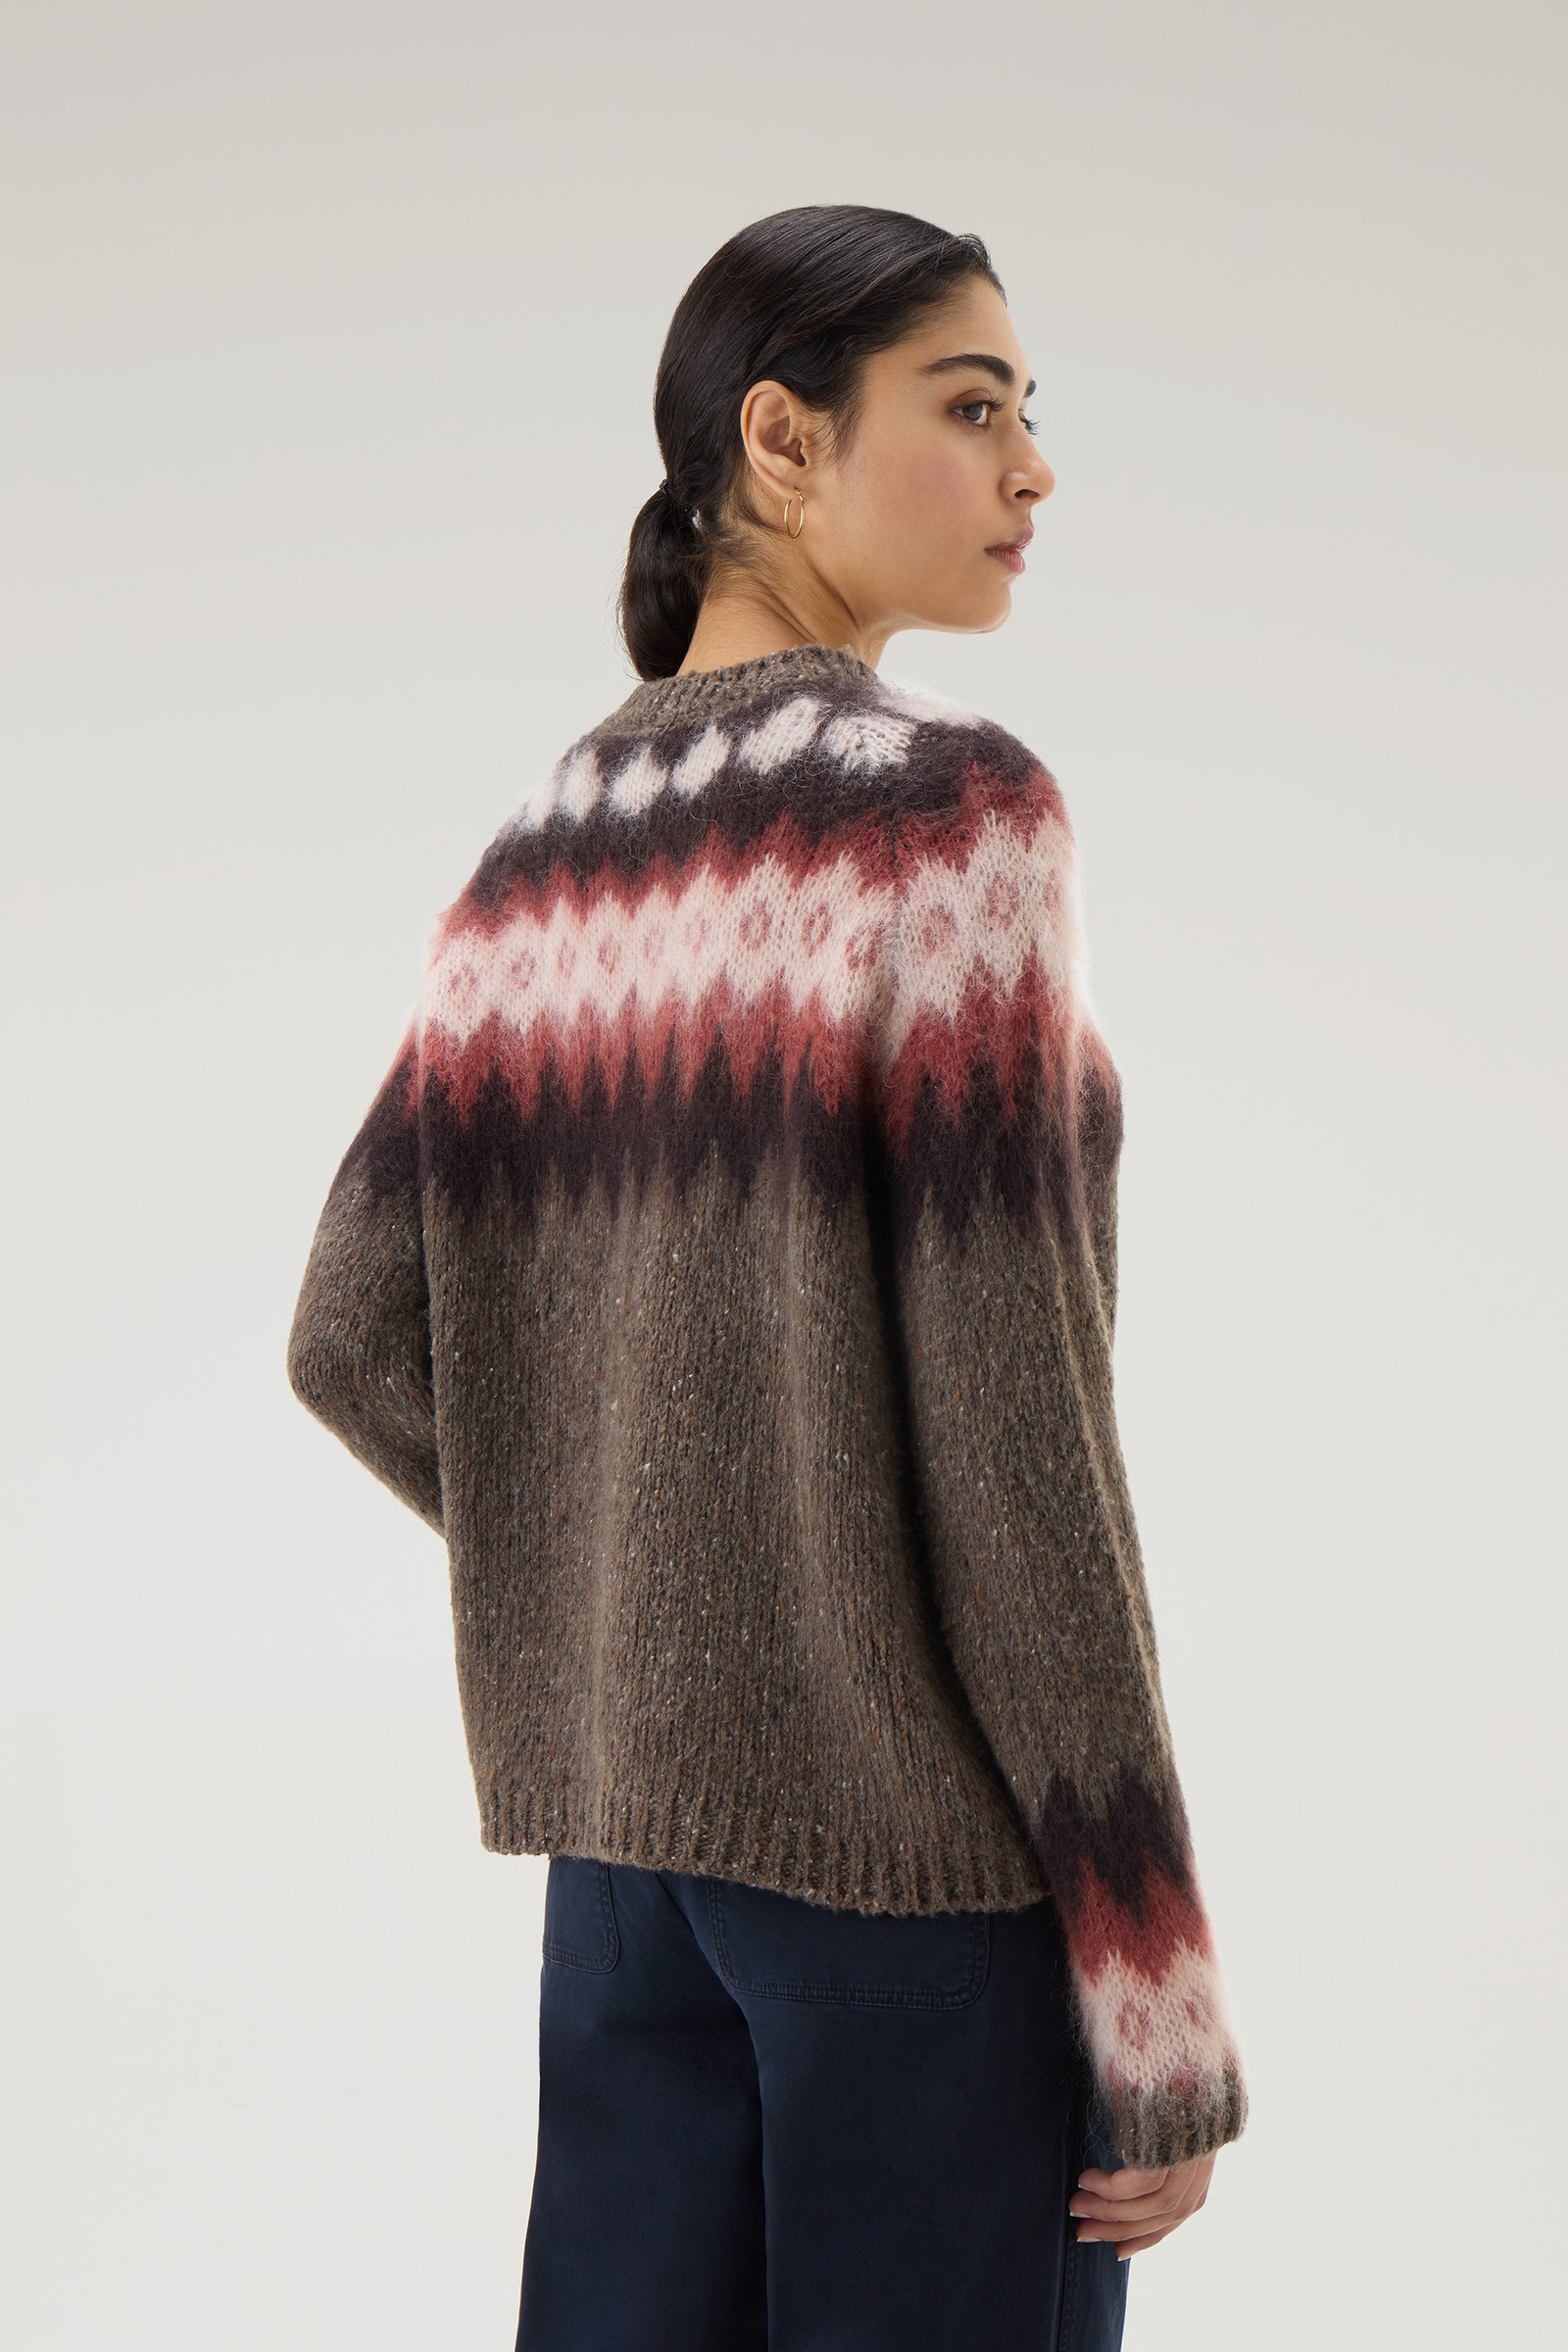 Women's Fair Isle Pullover in Wool and Mohair Blend Brown | Woolrich USA